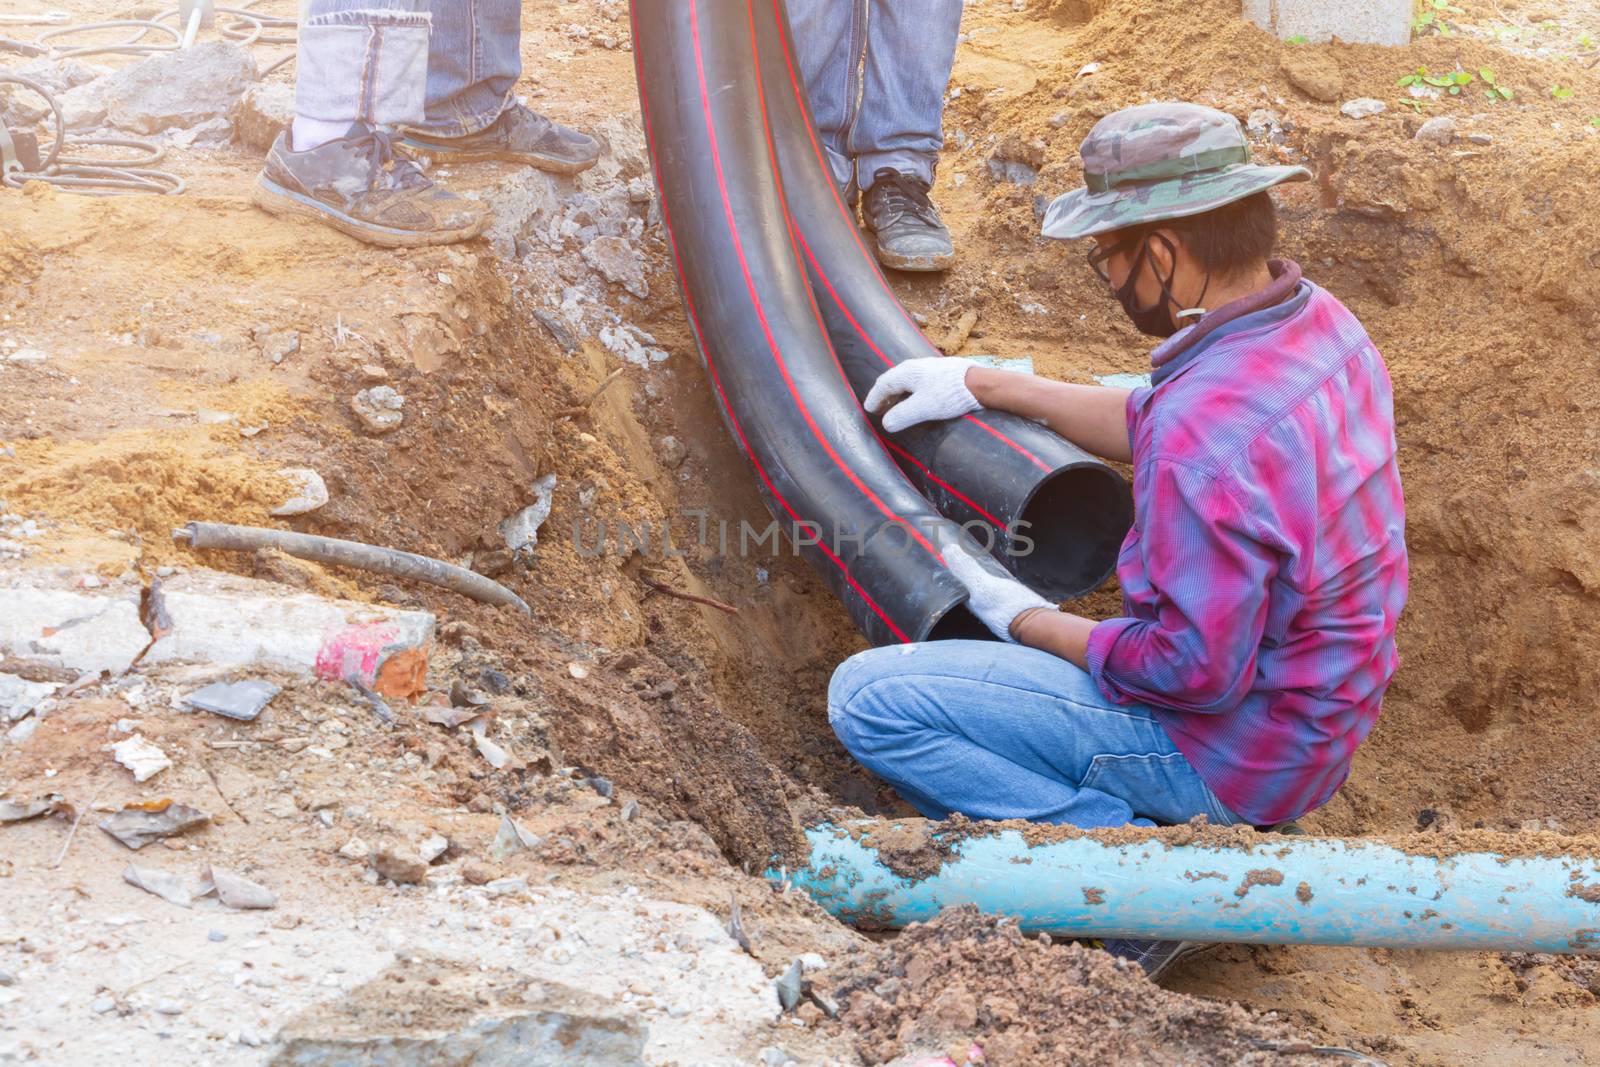 repair water pipes black and worker On the ground